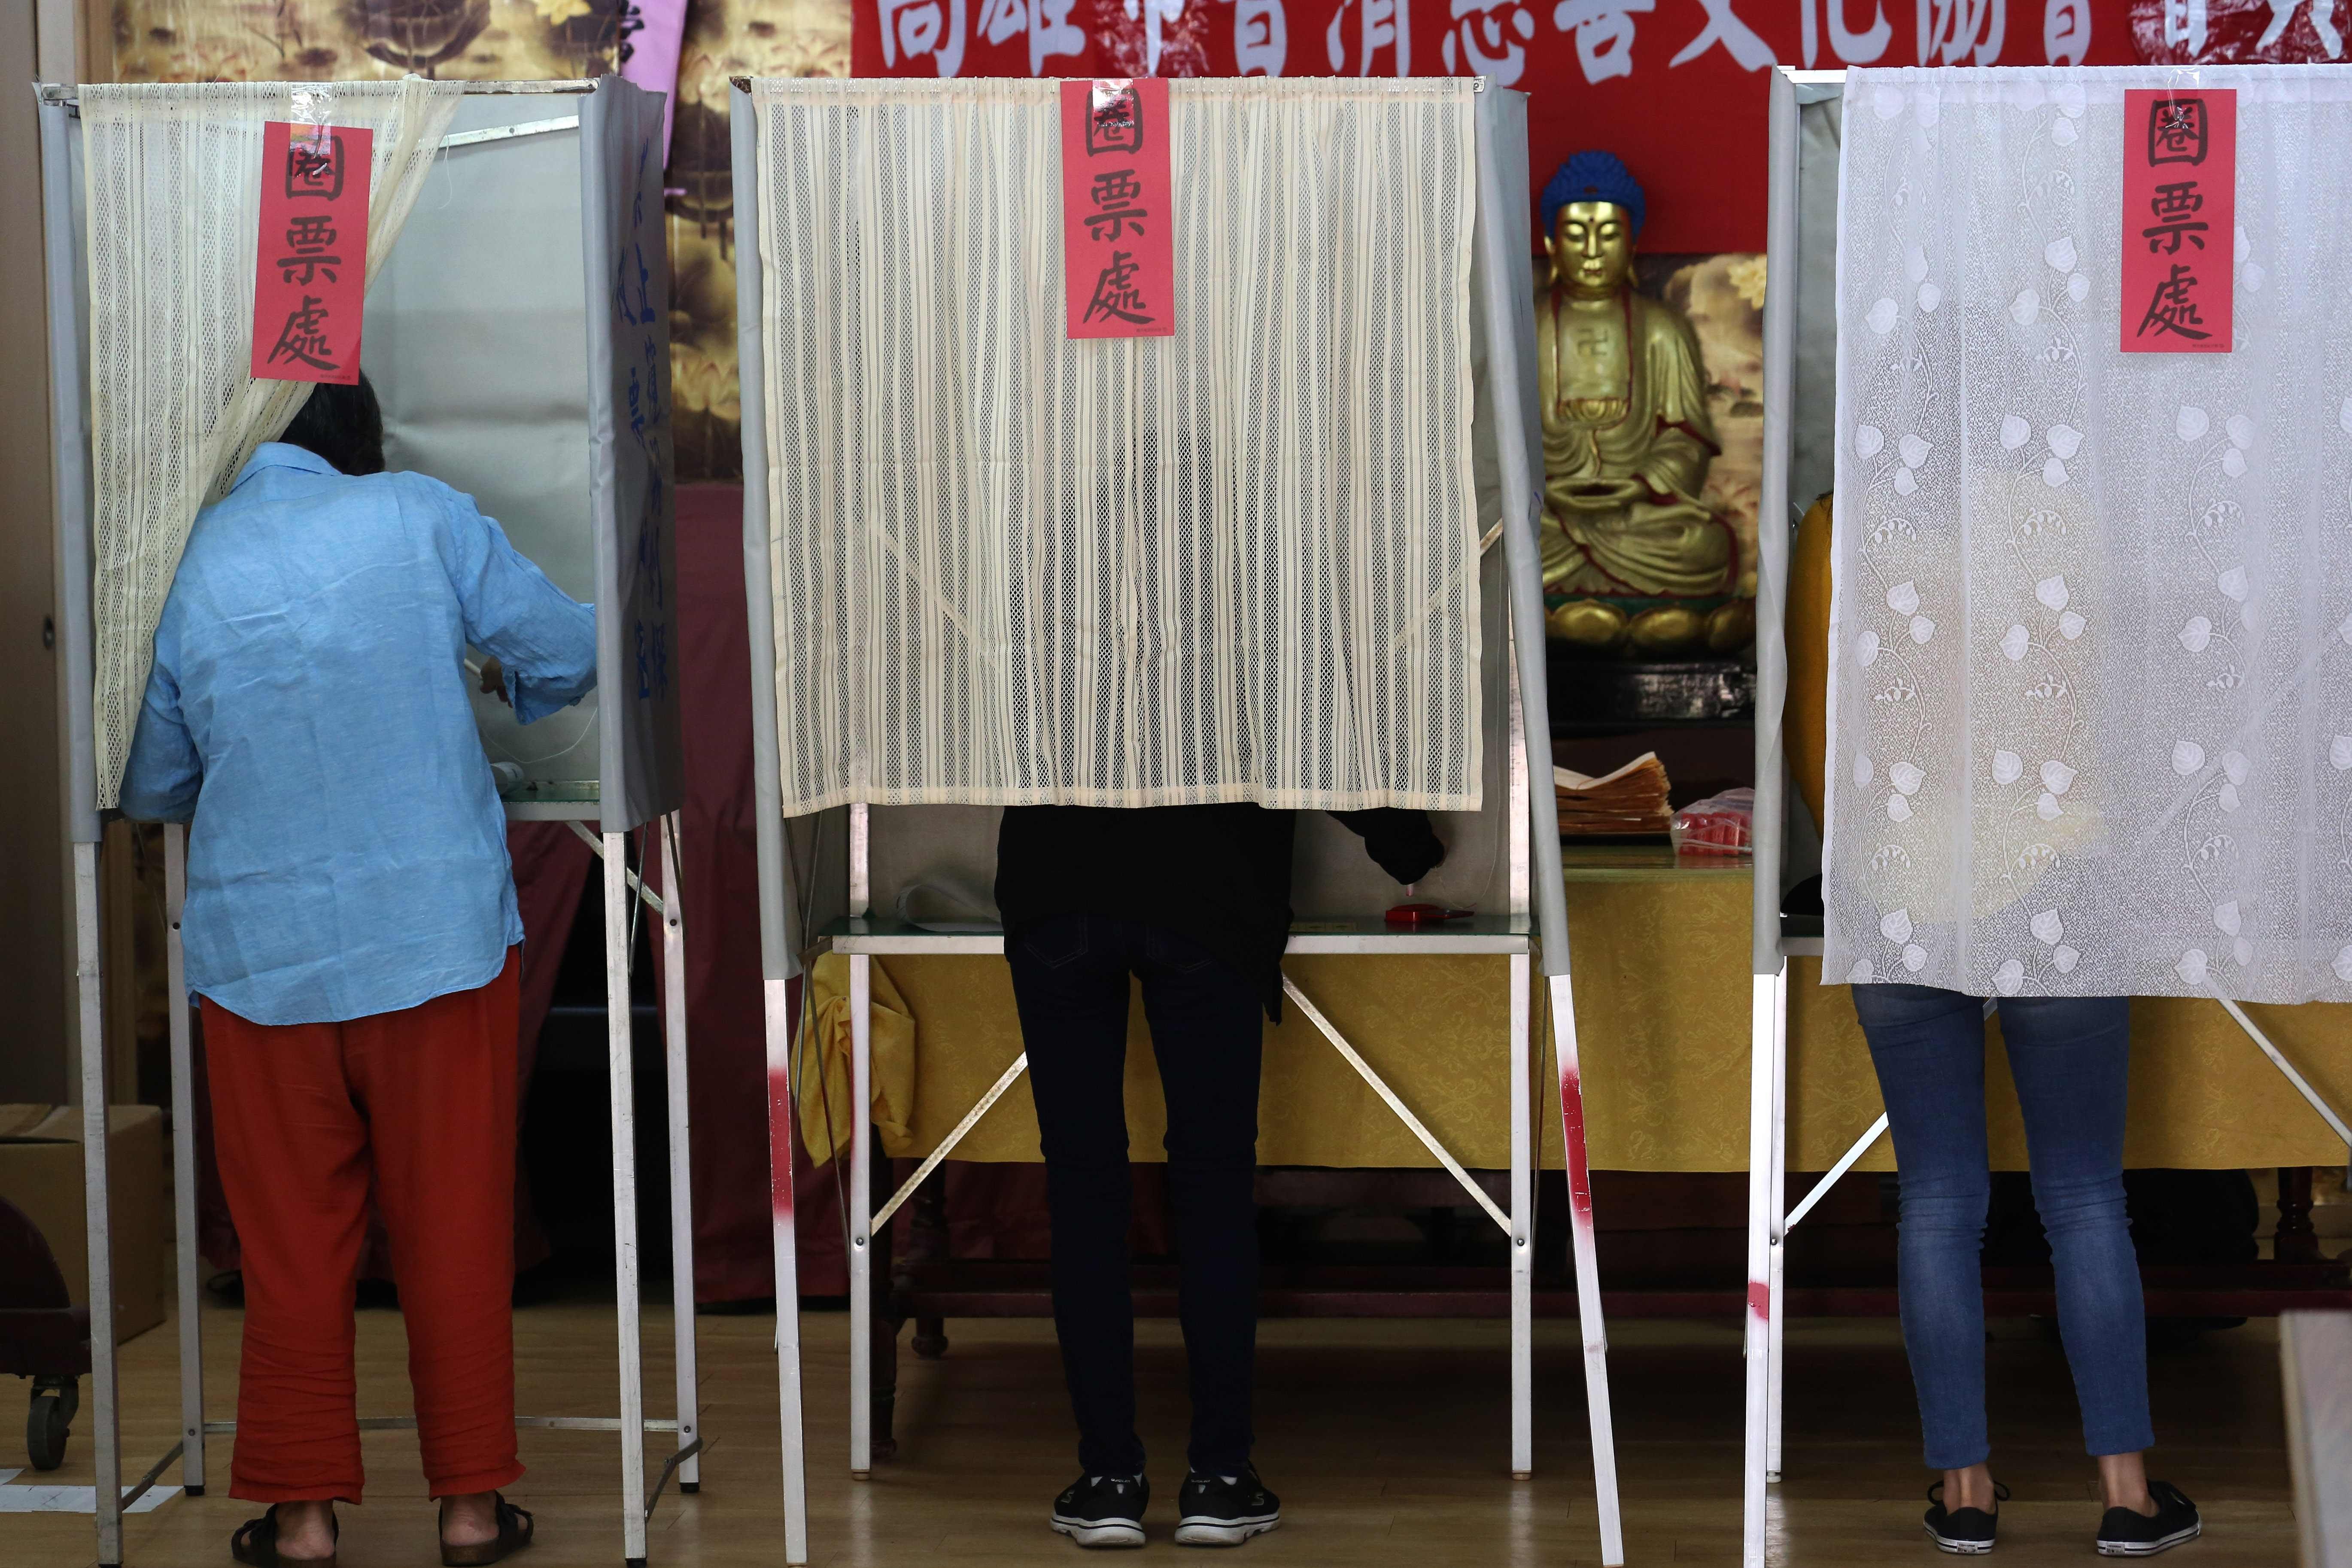 People across Taiwan went to the polls on Saturday to elect their president and lawmakers. Photo: AFP